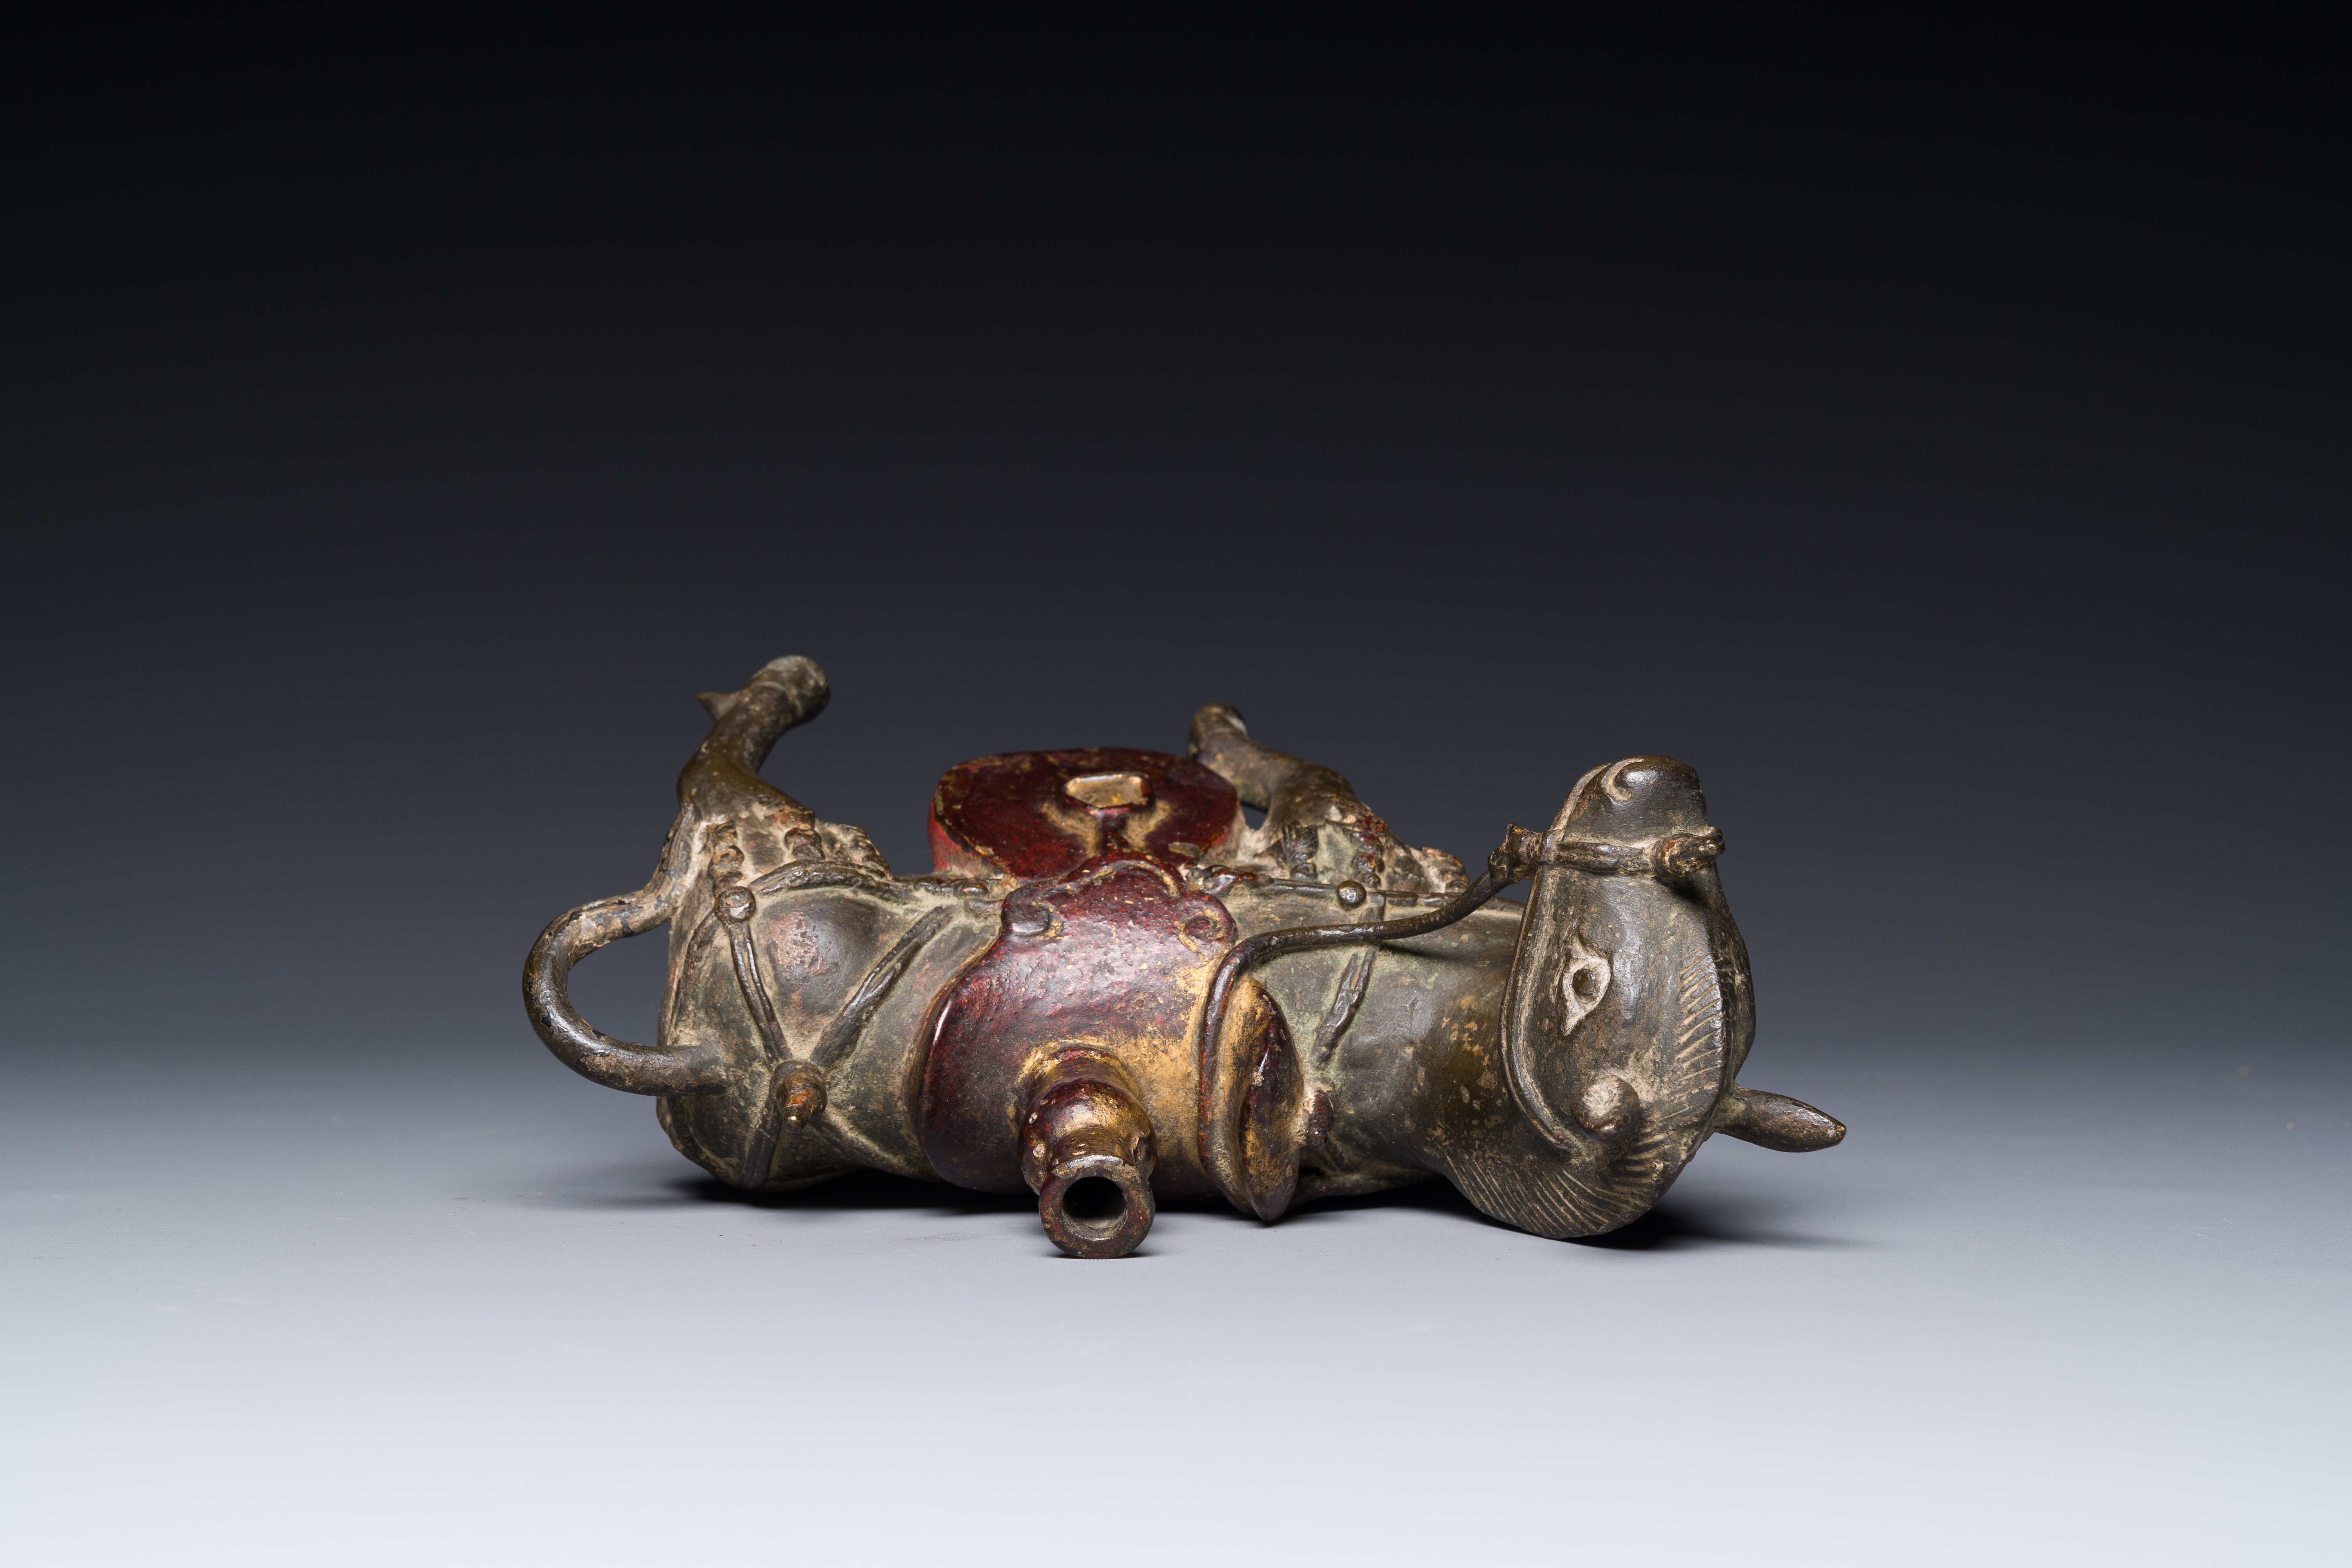 A rare Chinese partly lacquered and gilt bronze incense holder in the shape of a horse, Yuan/early M - Image 6 of 7